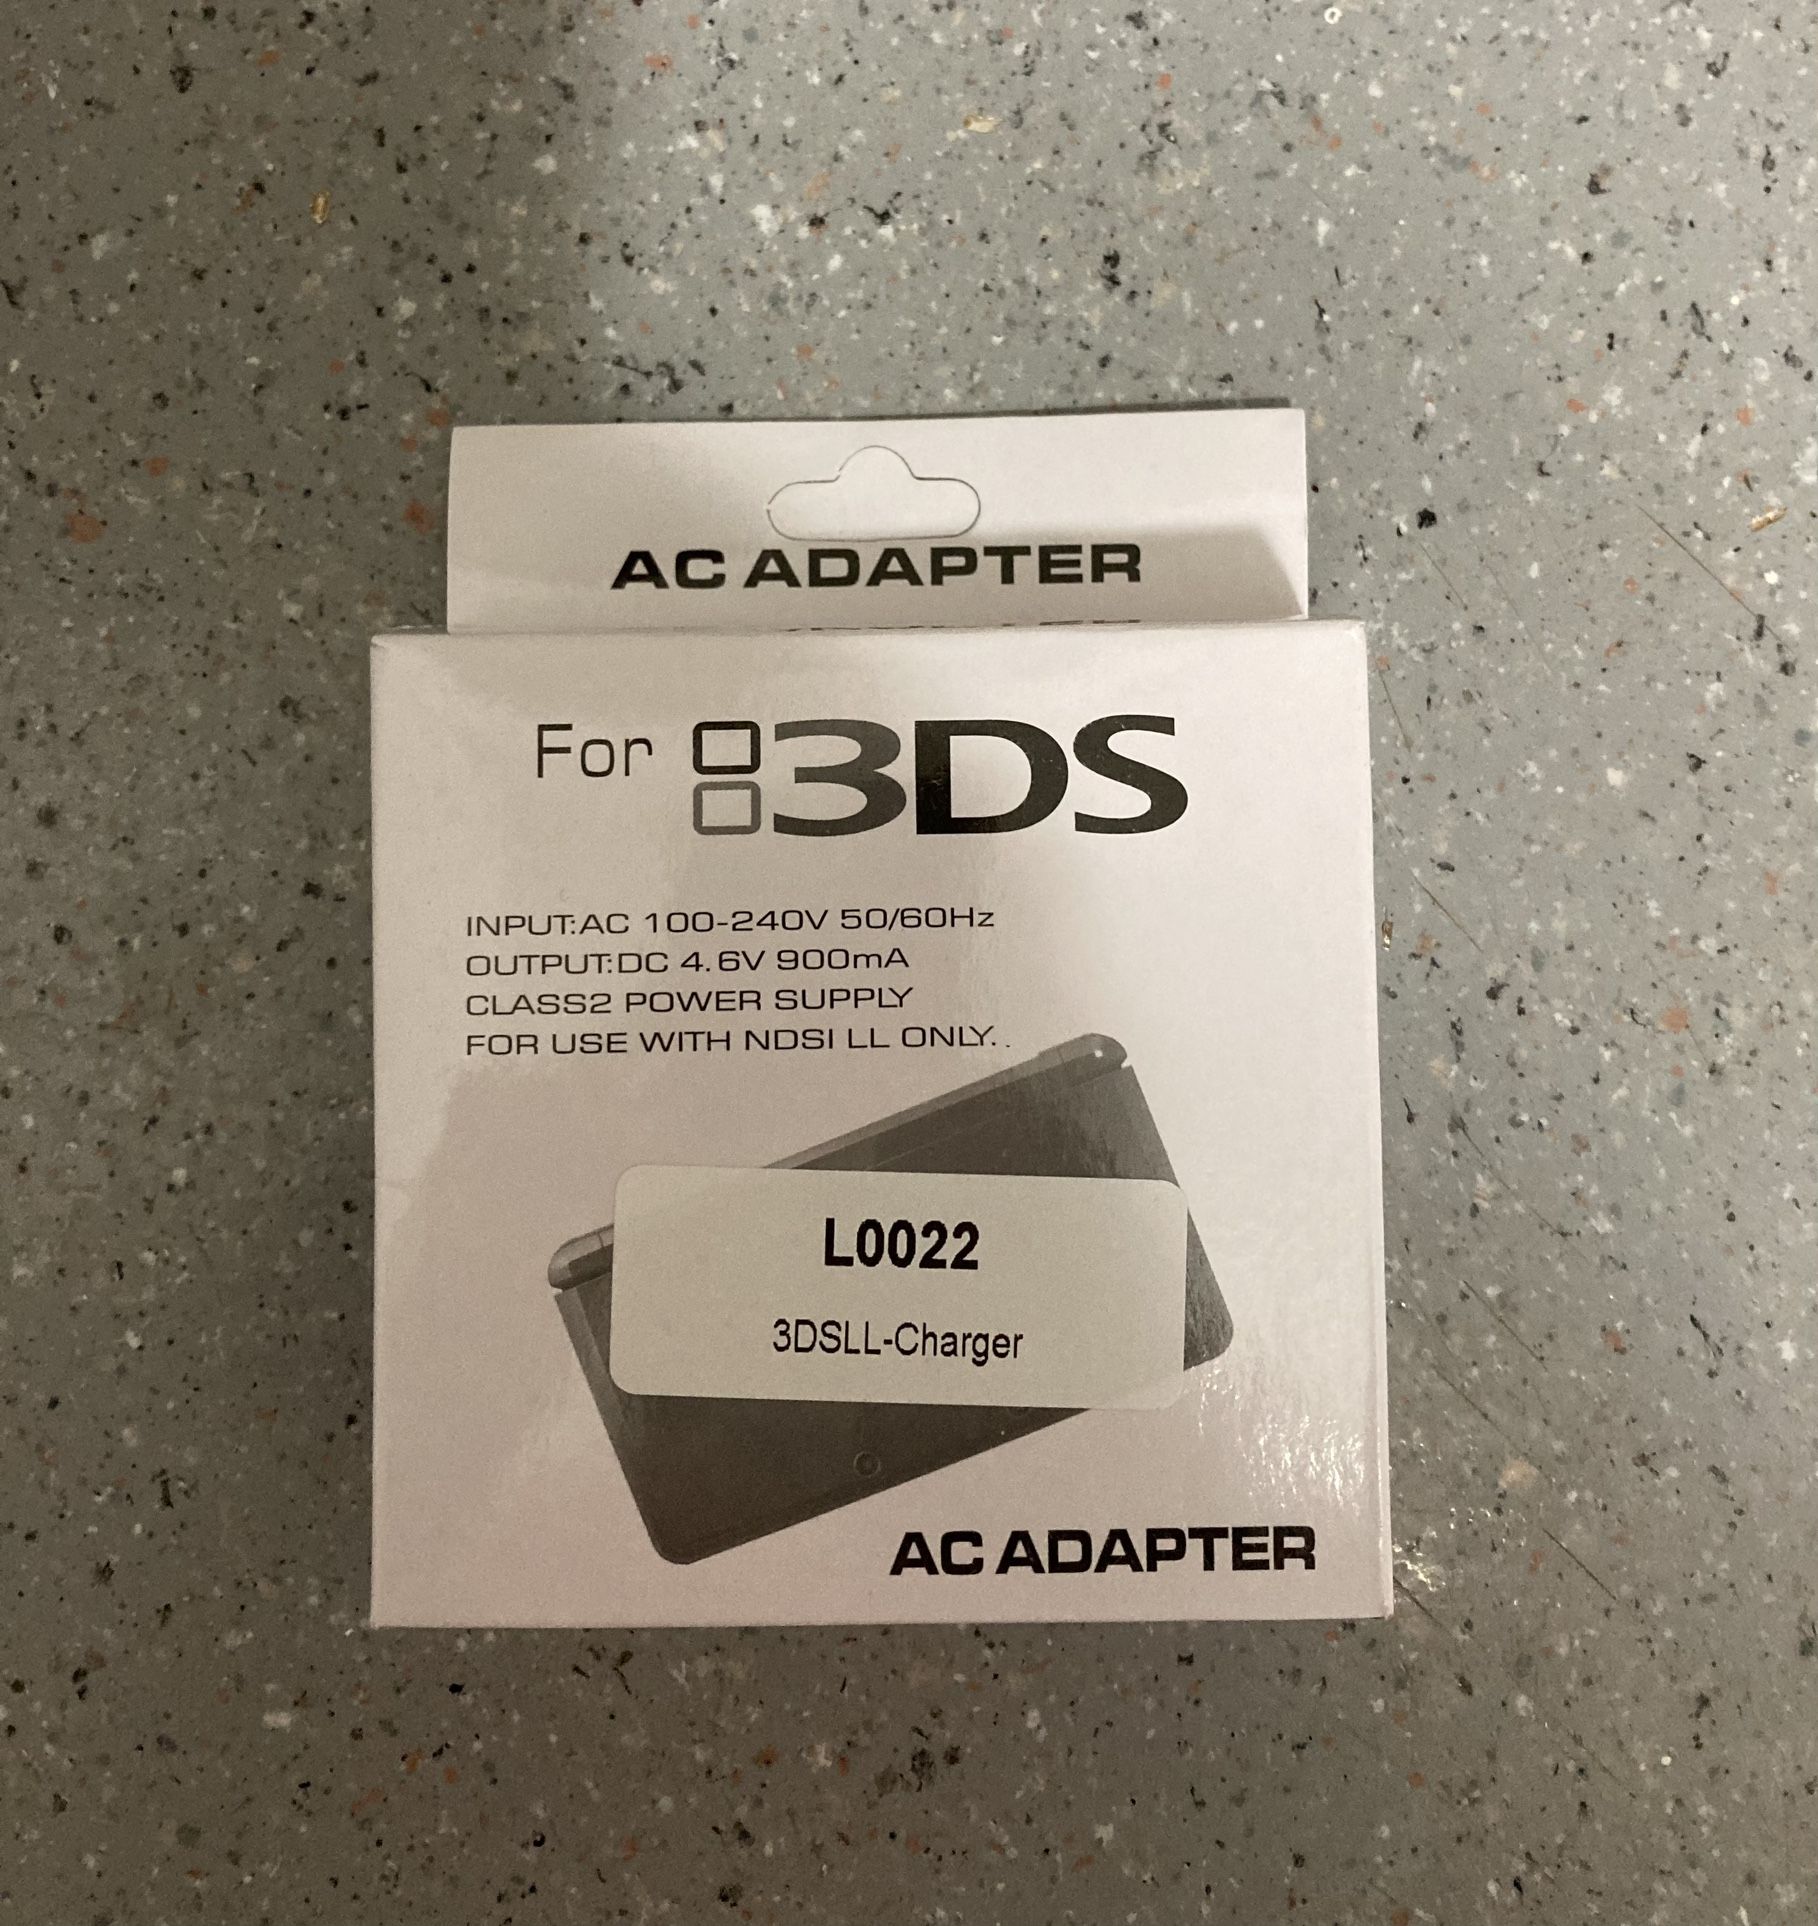 Wall charger for Nintendo DSi/2DS/3DS- Brand New.  $7